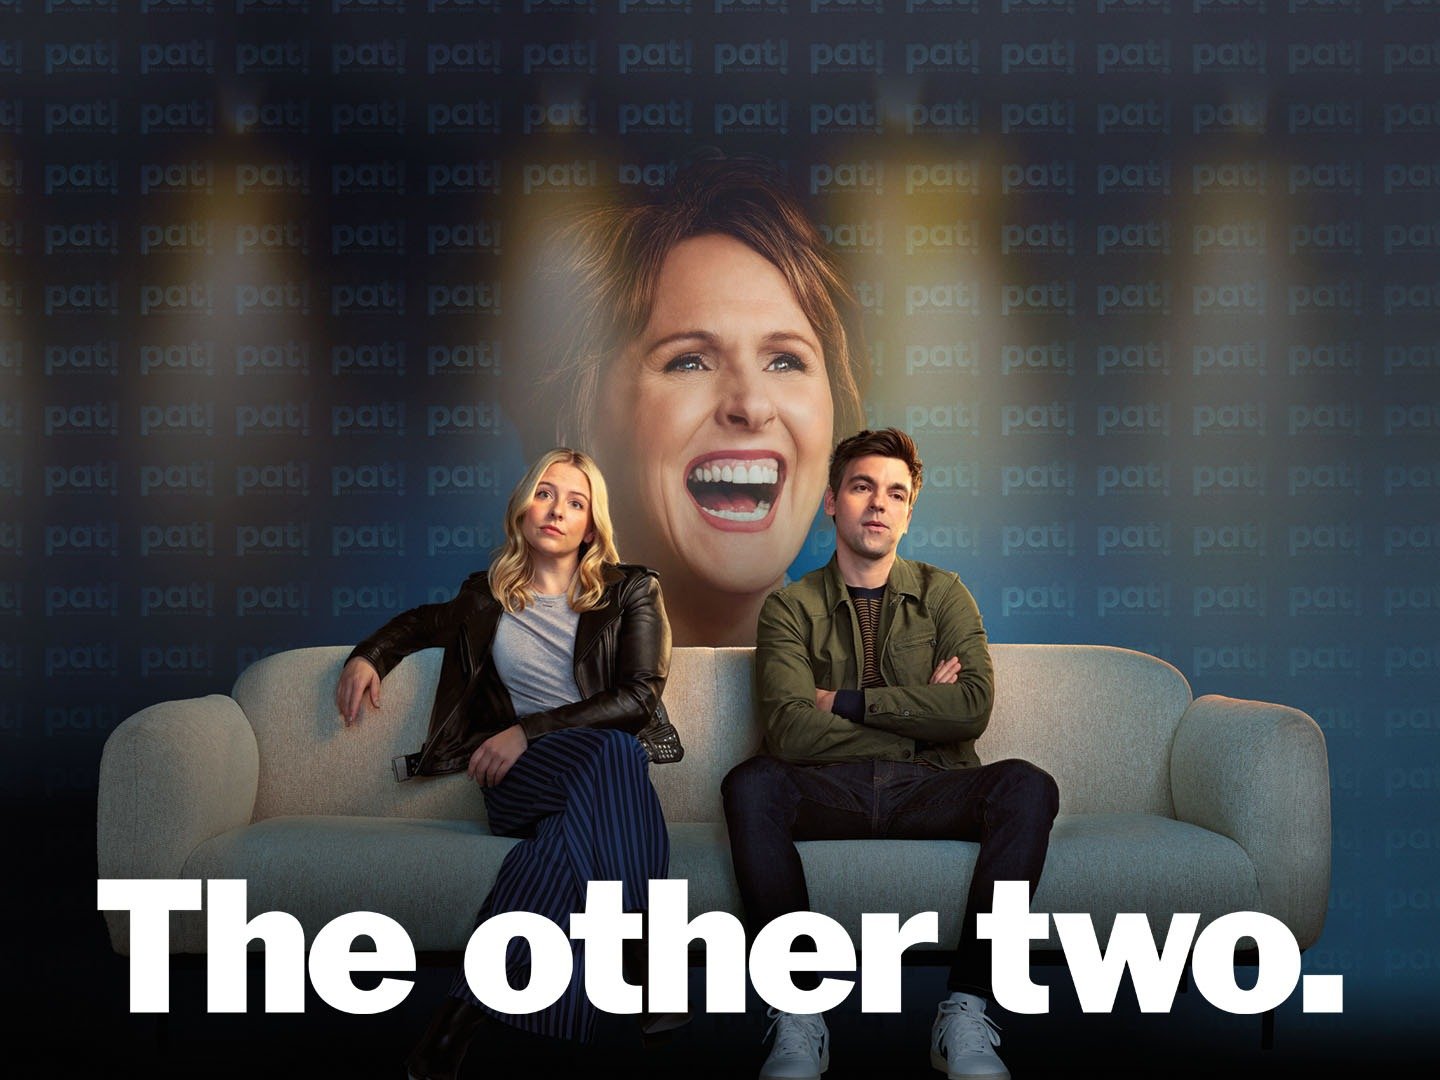 "The Other Two: Season 2 photo 2"